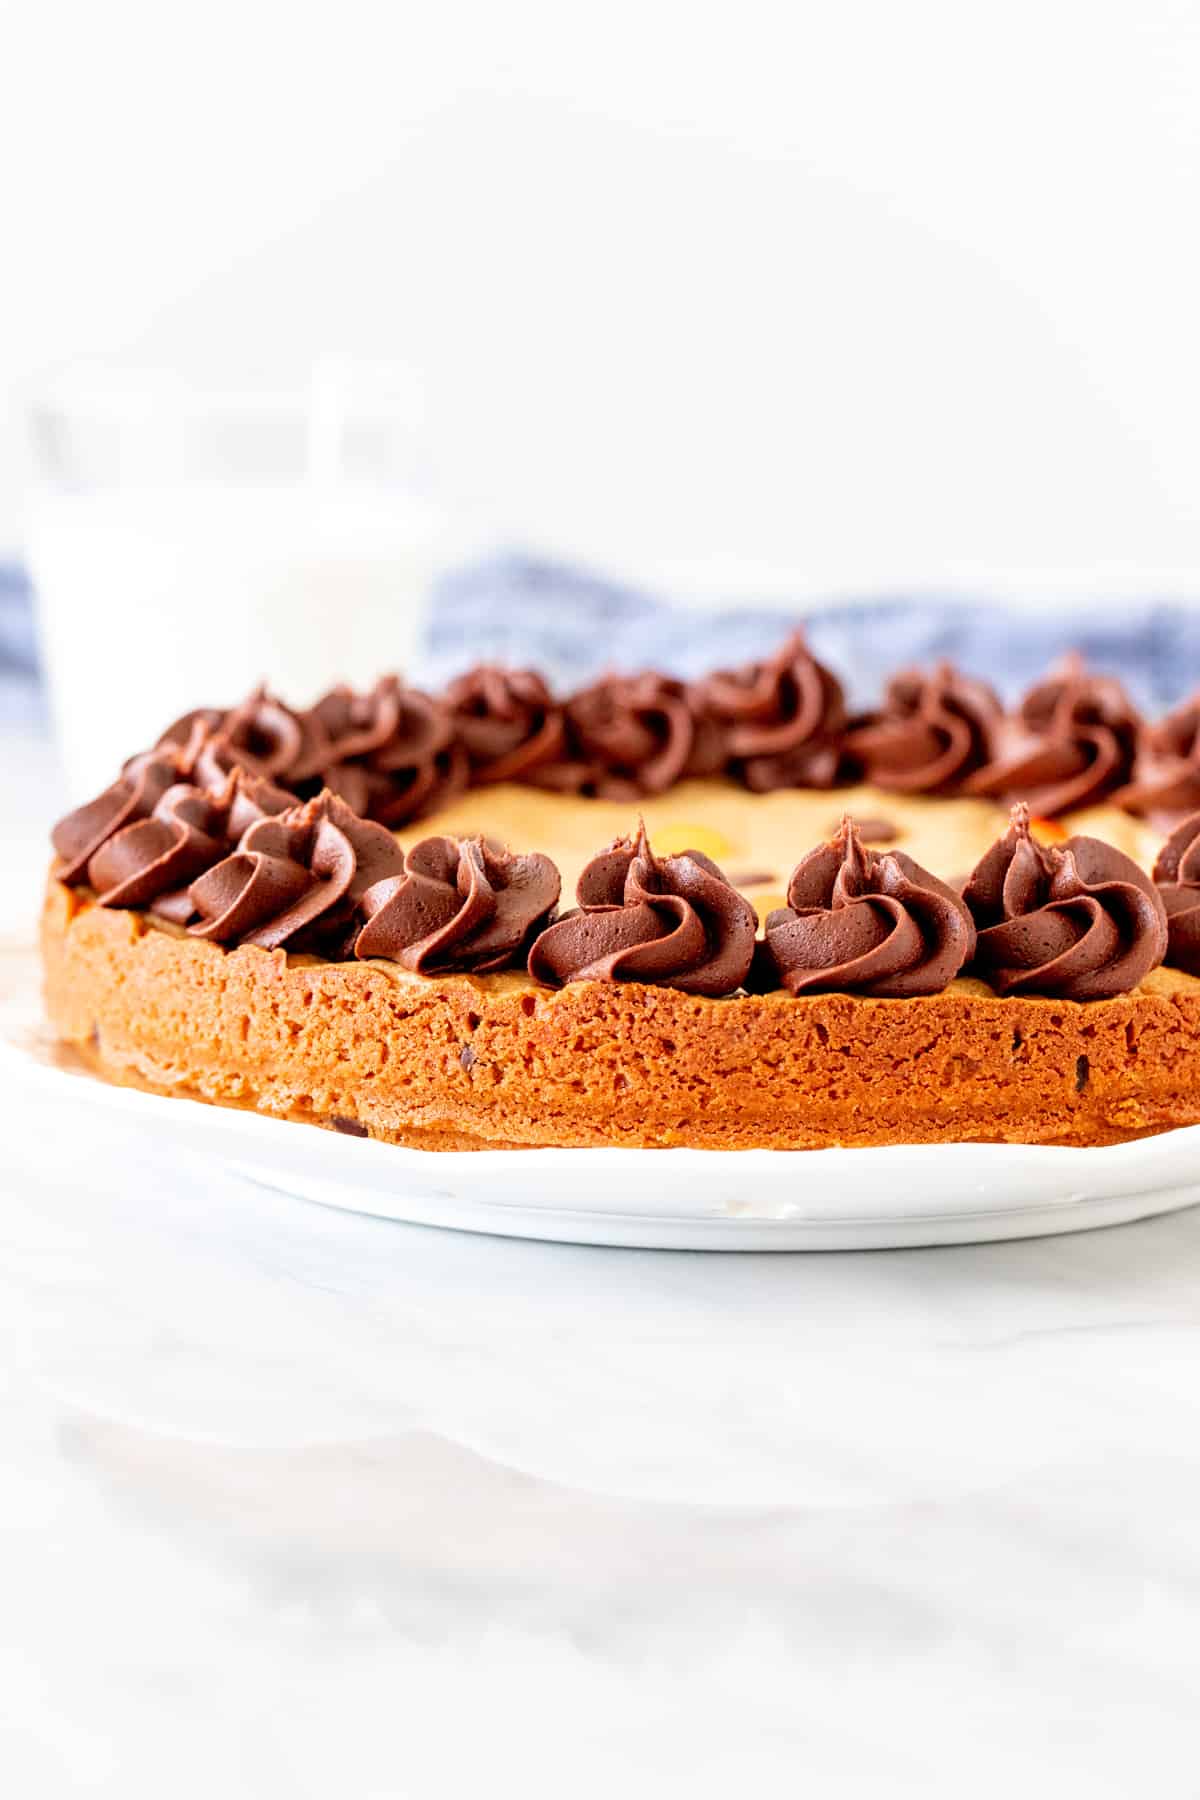 Peanut butter cookie cake with chocolate frosting around the edges